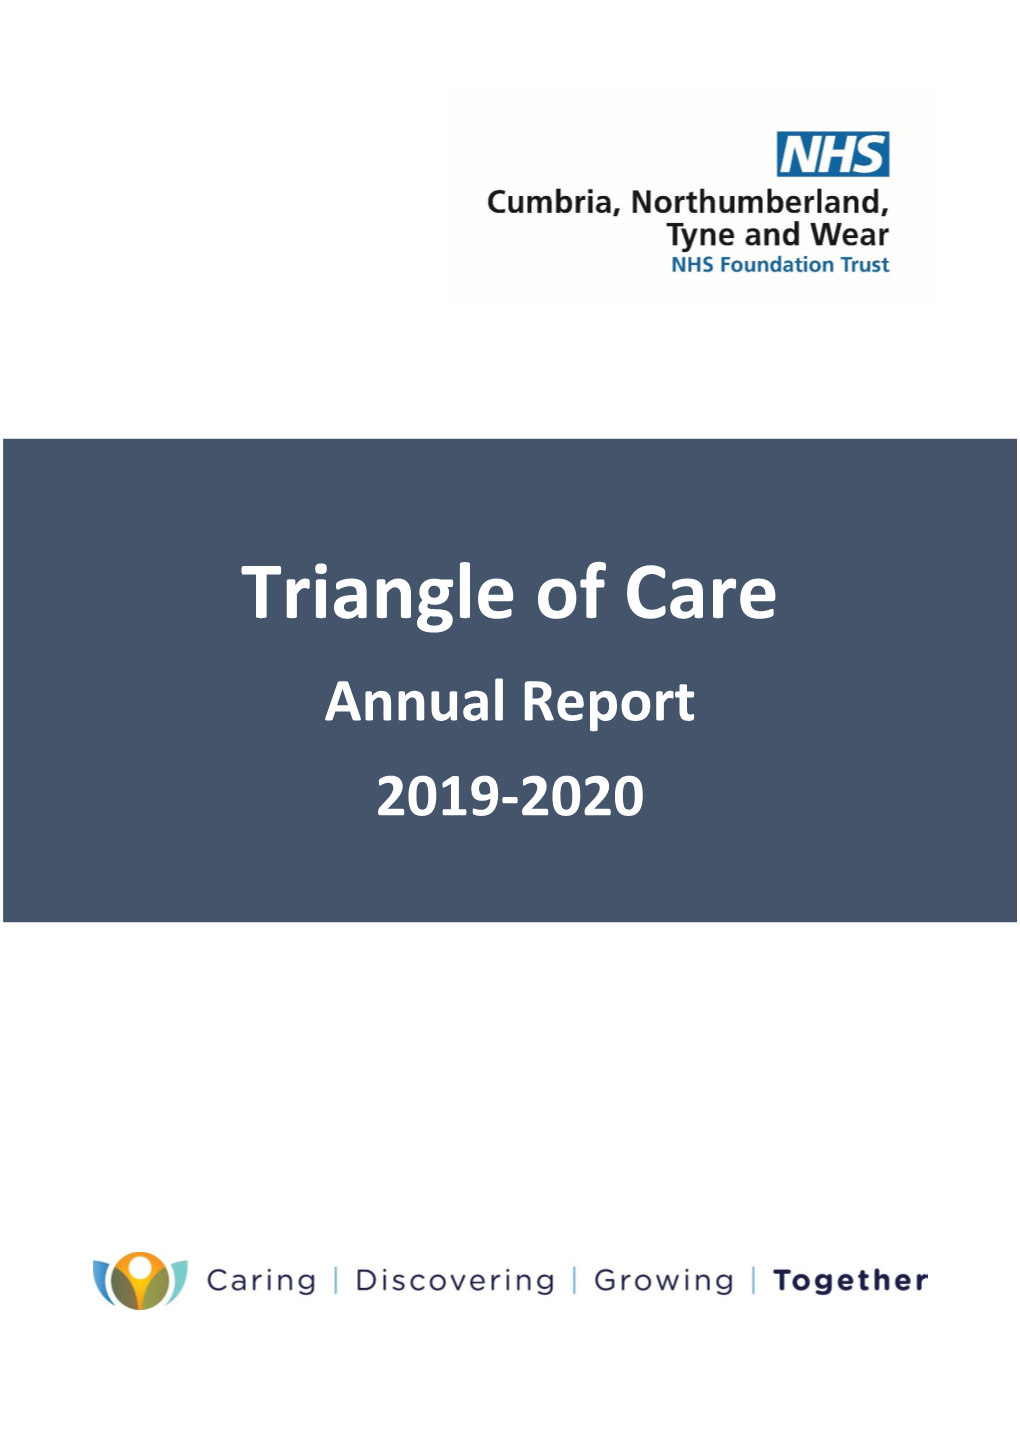 The Triangle of Care Annual Report